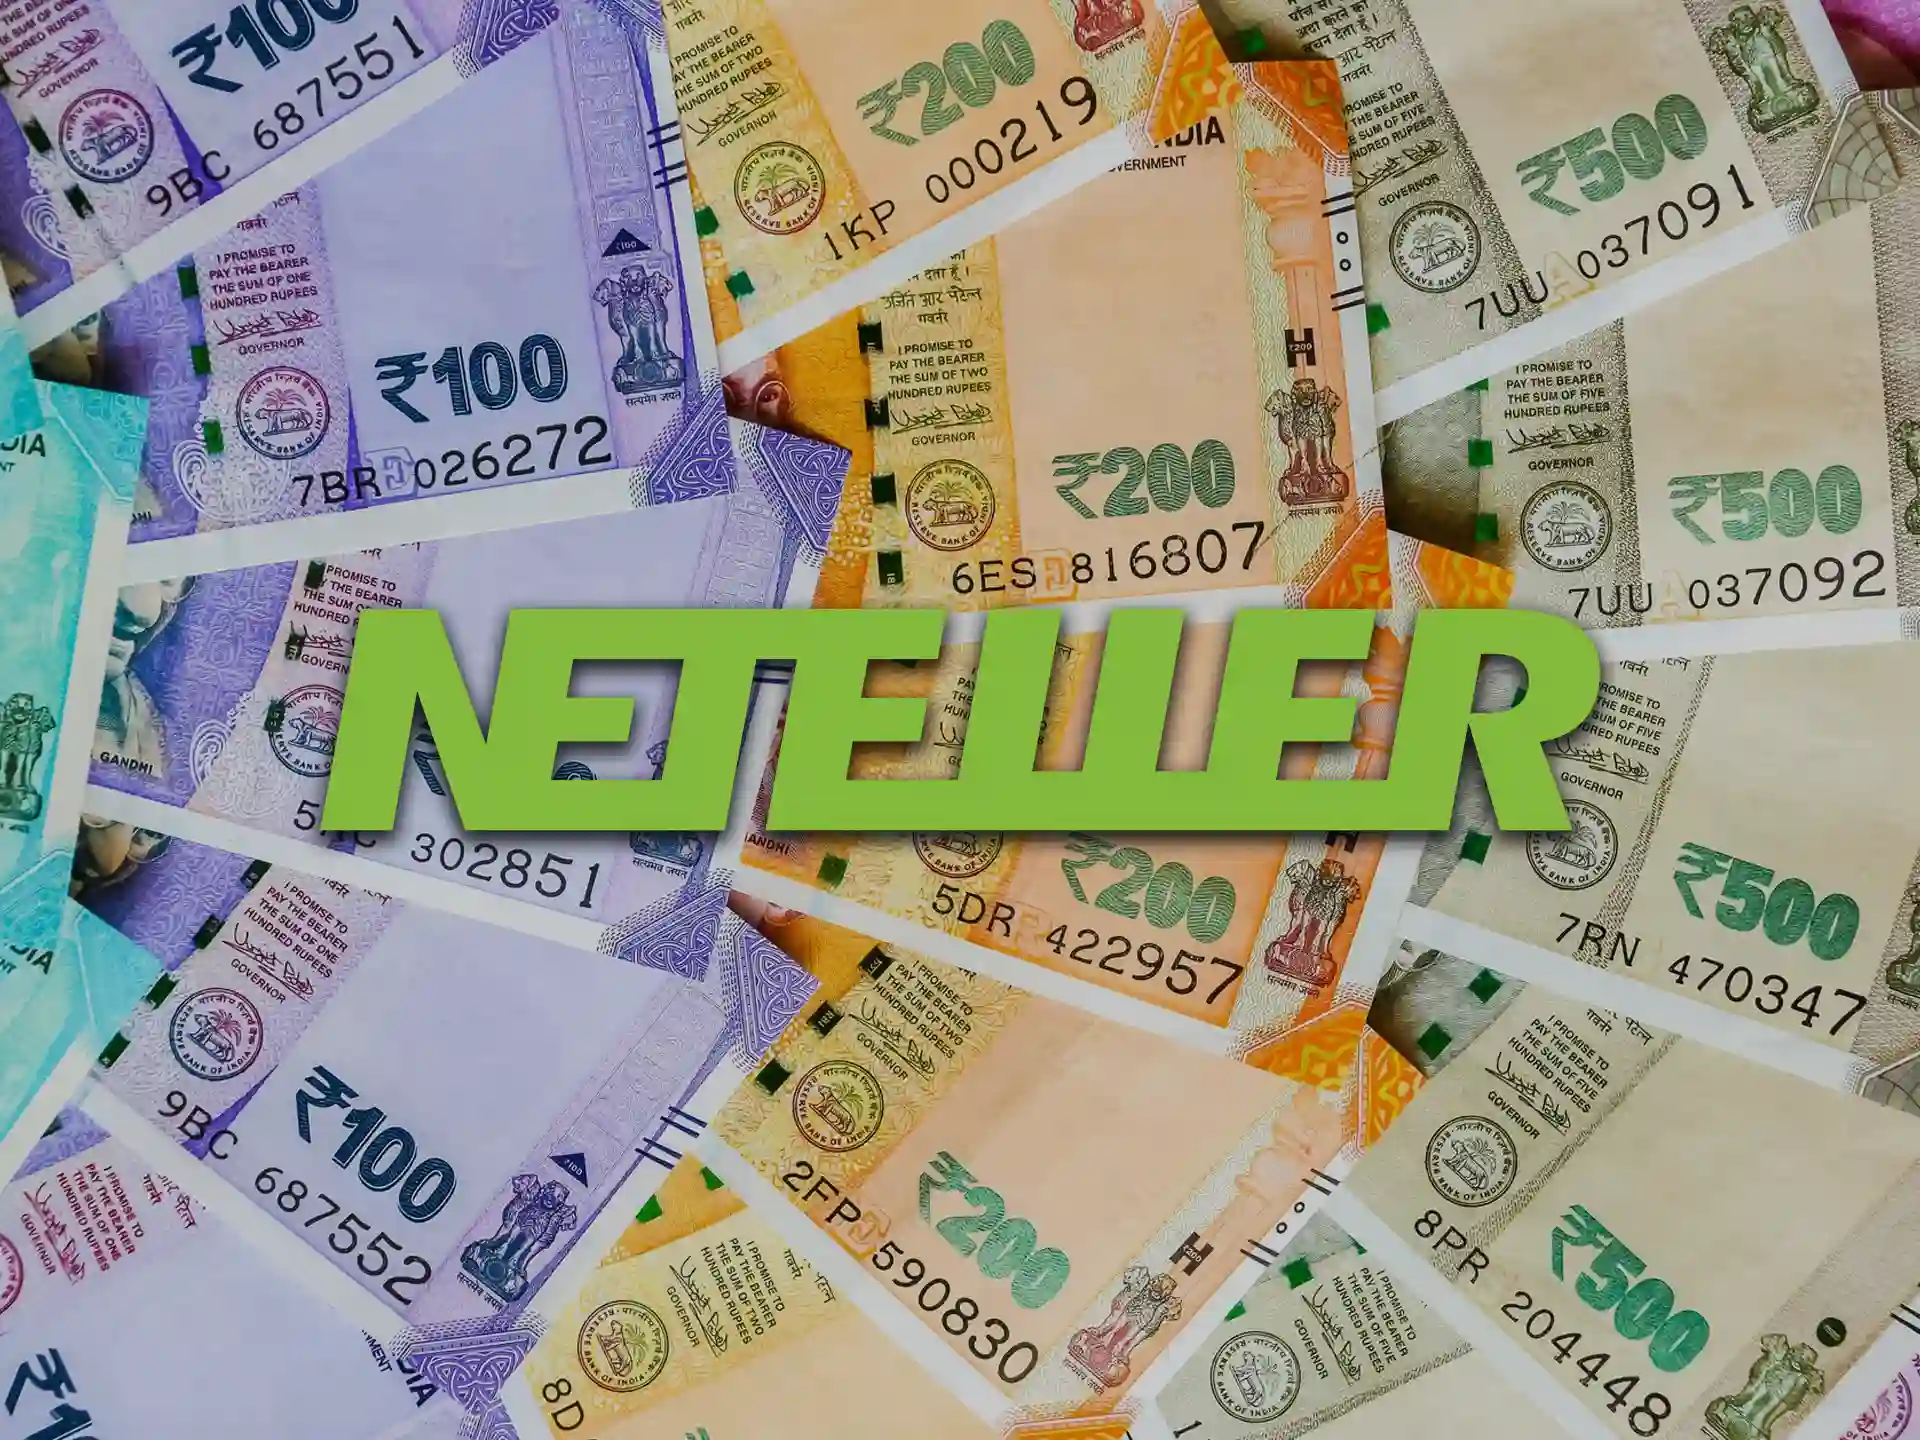 Neteller is very popular among Indian players.